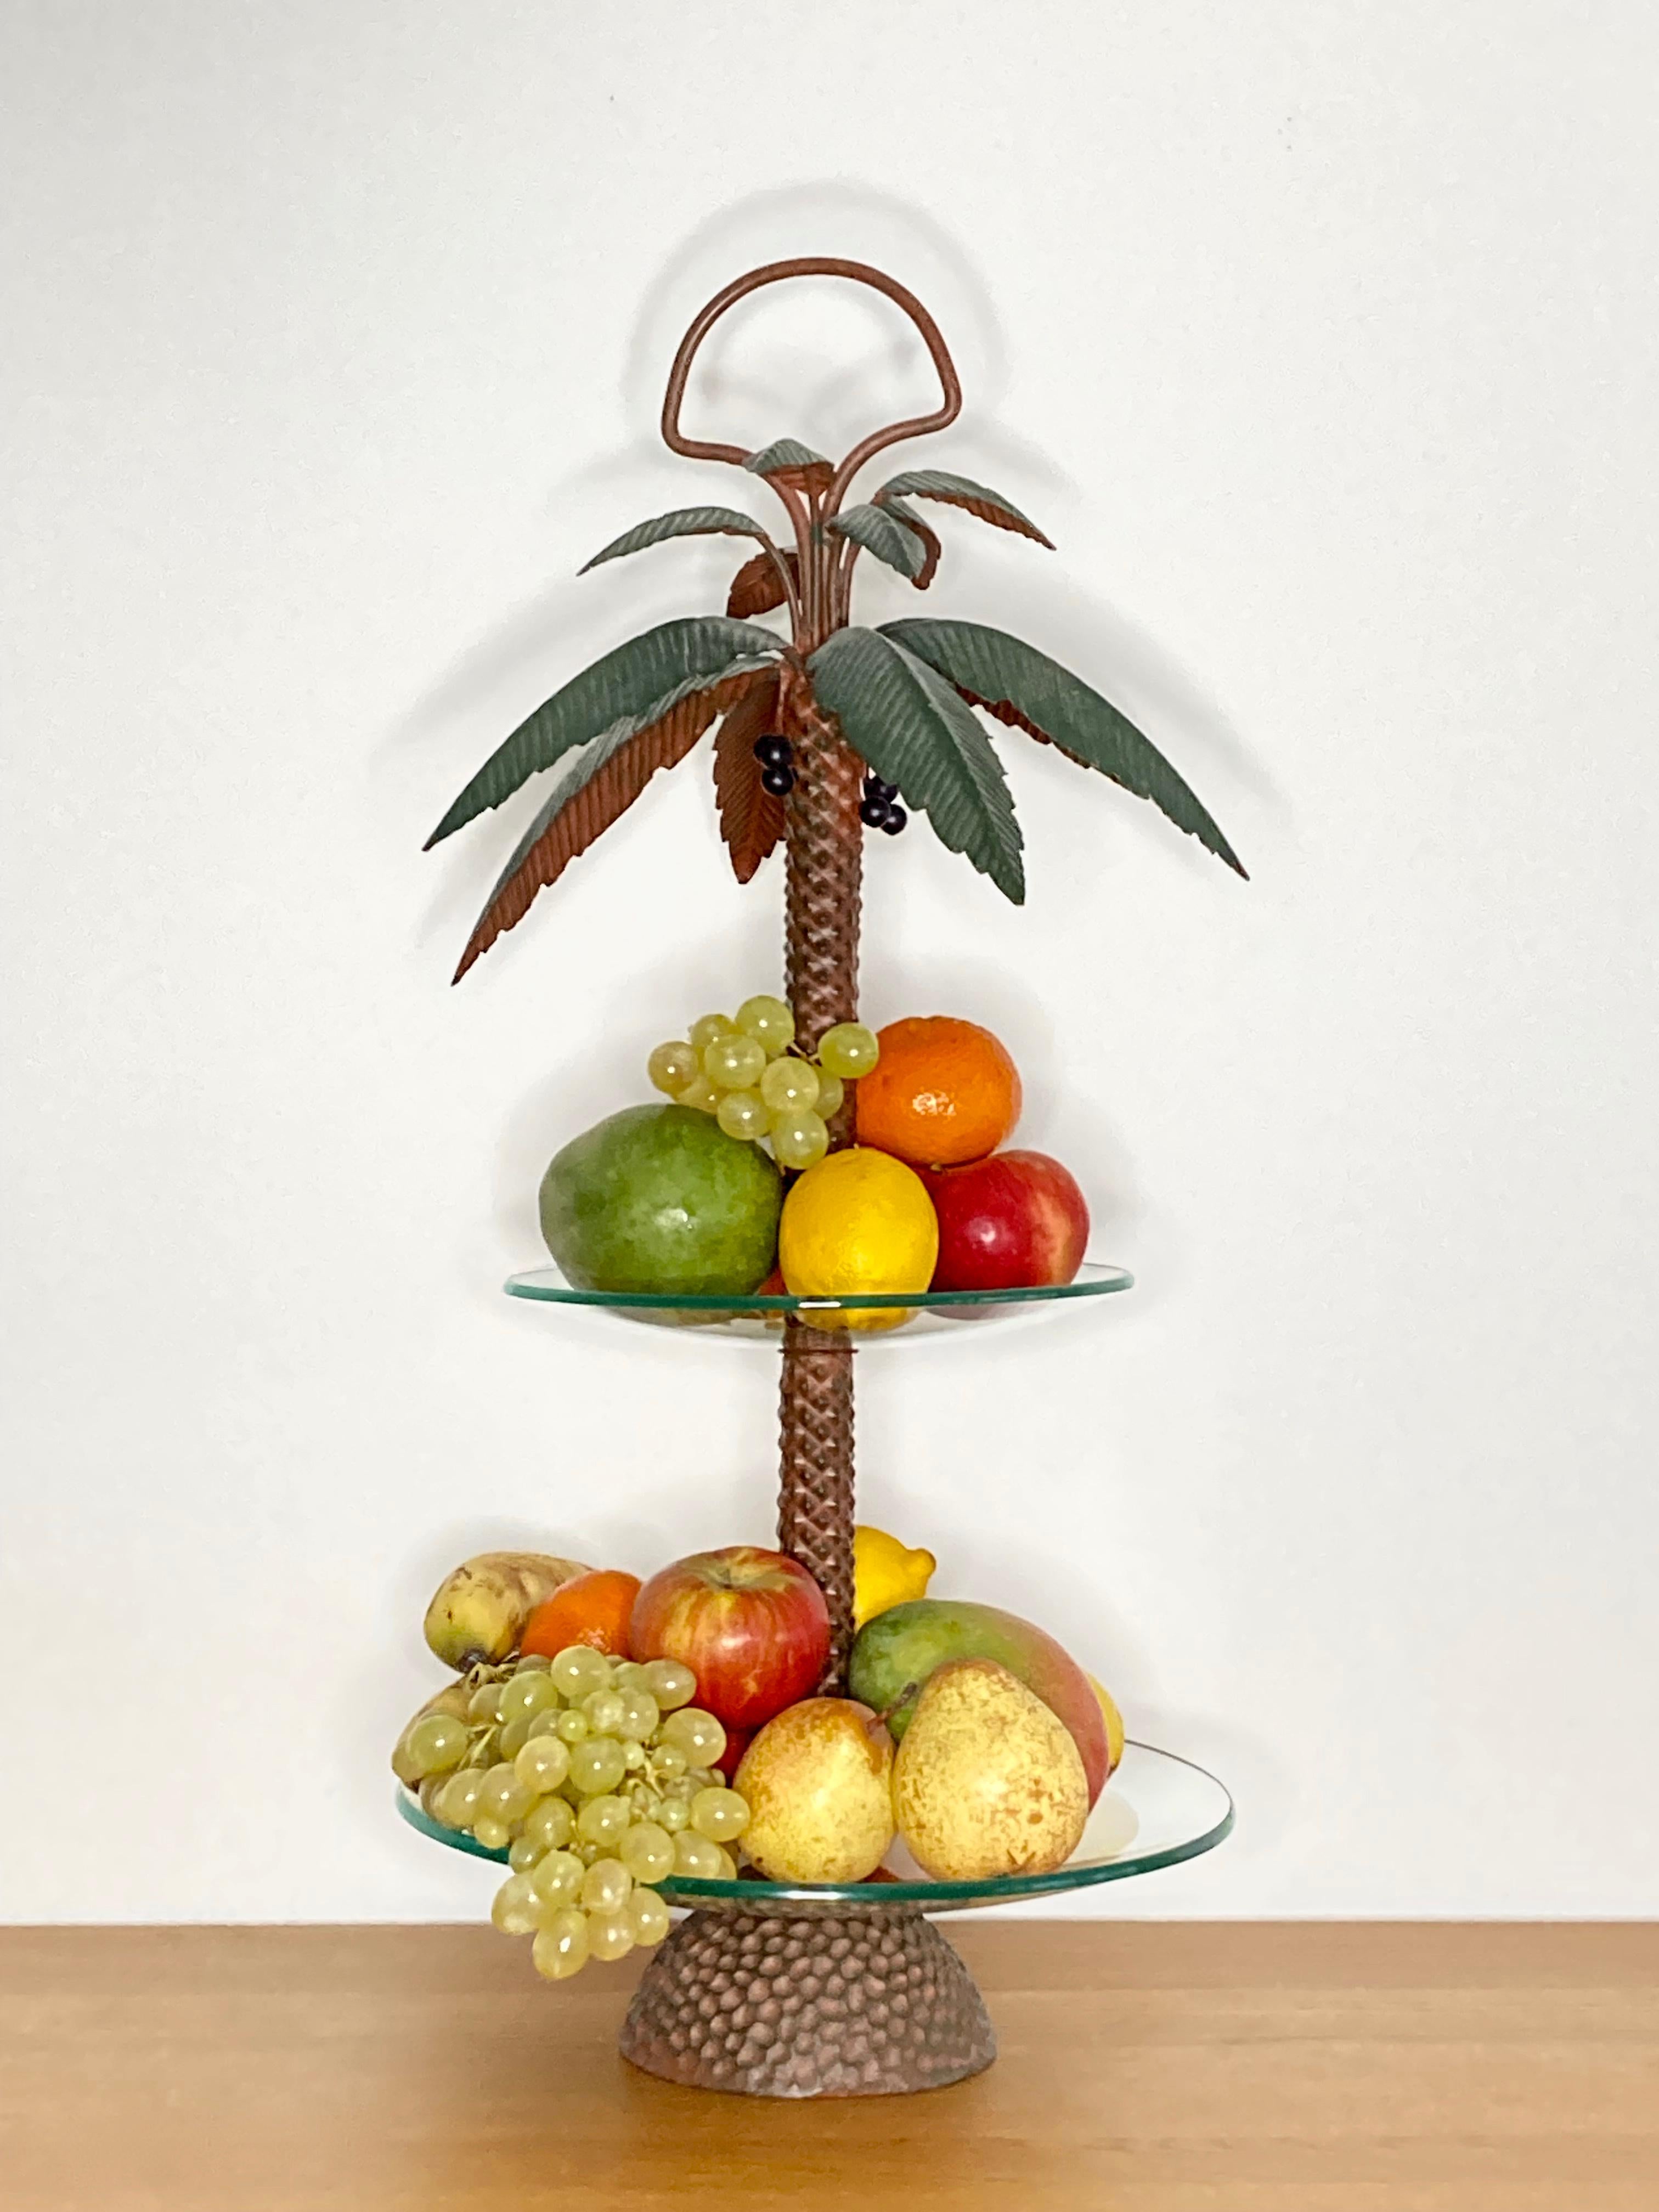 A Mid-20th Century vintage two tiers serving plate/cake stand made of metal and glass, sourced in France. Its unique palm tree design and its impressive Size (65cm/ 25 1/2